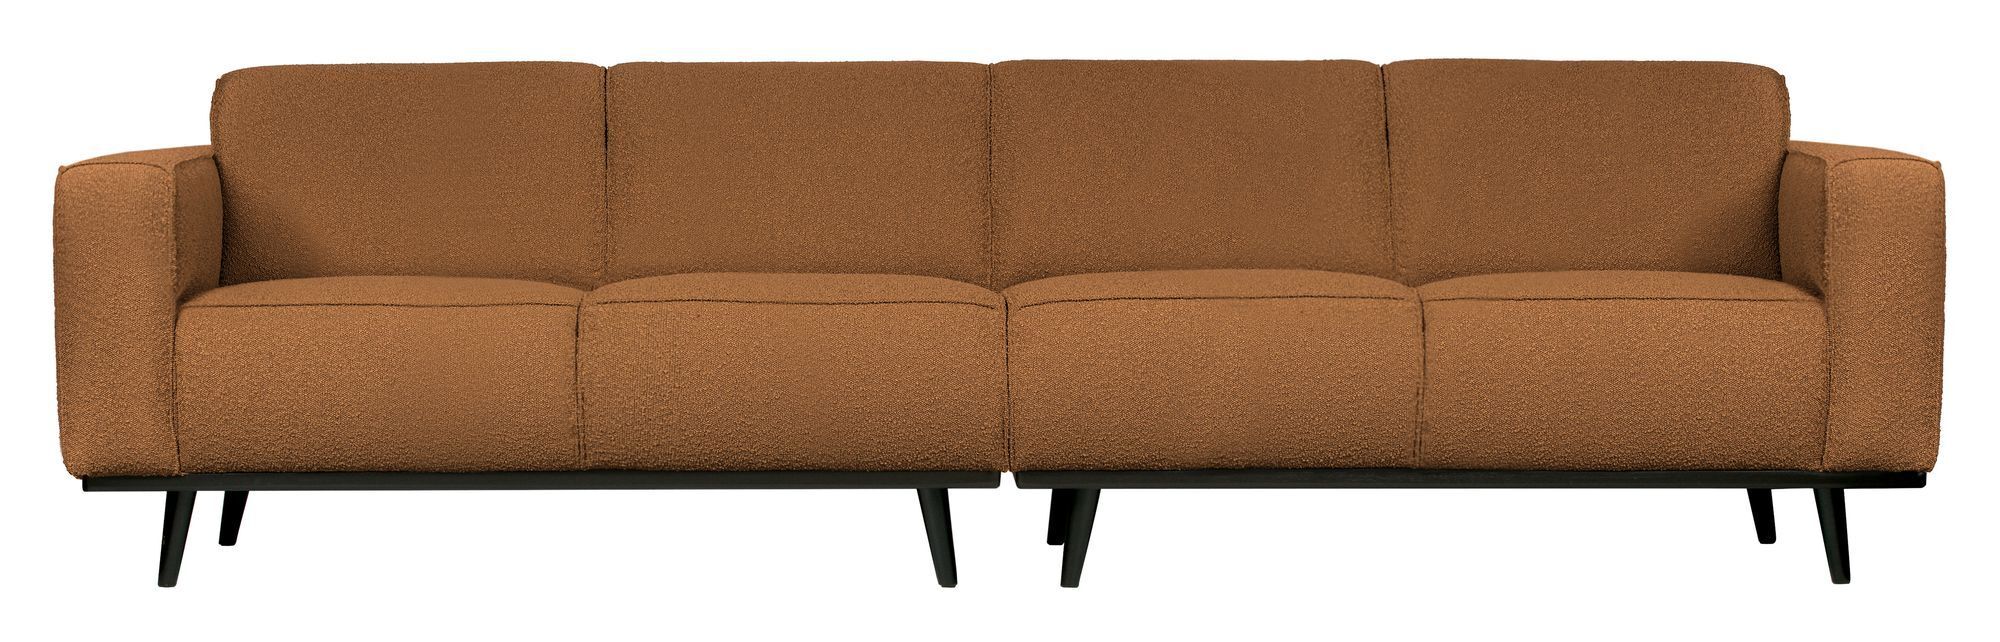 BePureHome Statement 4-pers. Sofa - Butter Bouclé   Unoliving